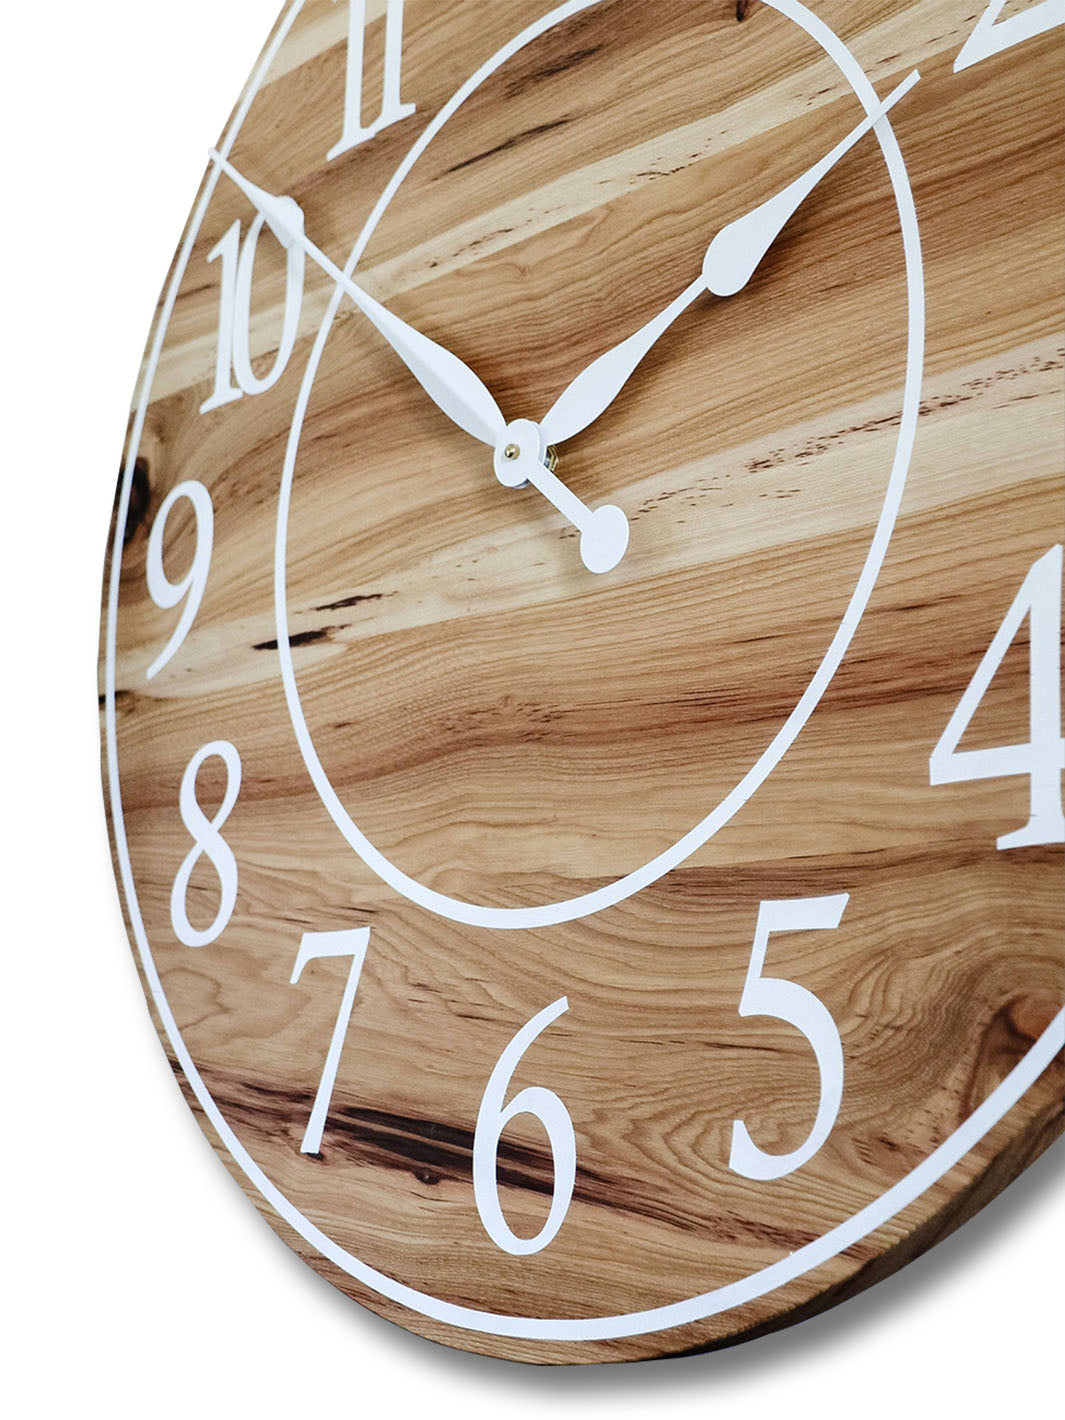 Solid Hickory Wood Wall Clock with Numbers and Lines Earthly Comfort Clocks 590-1